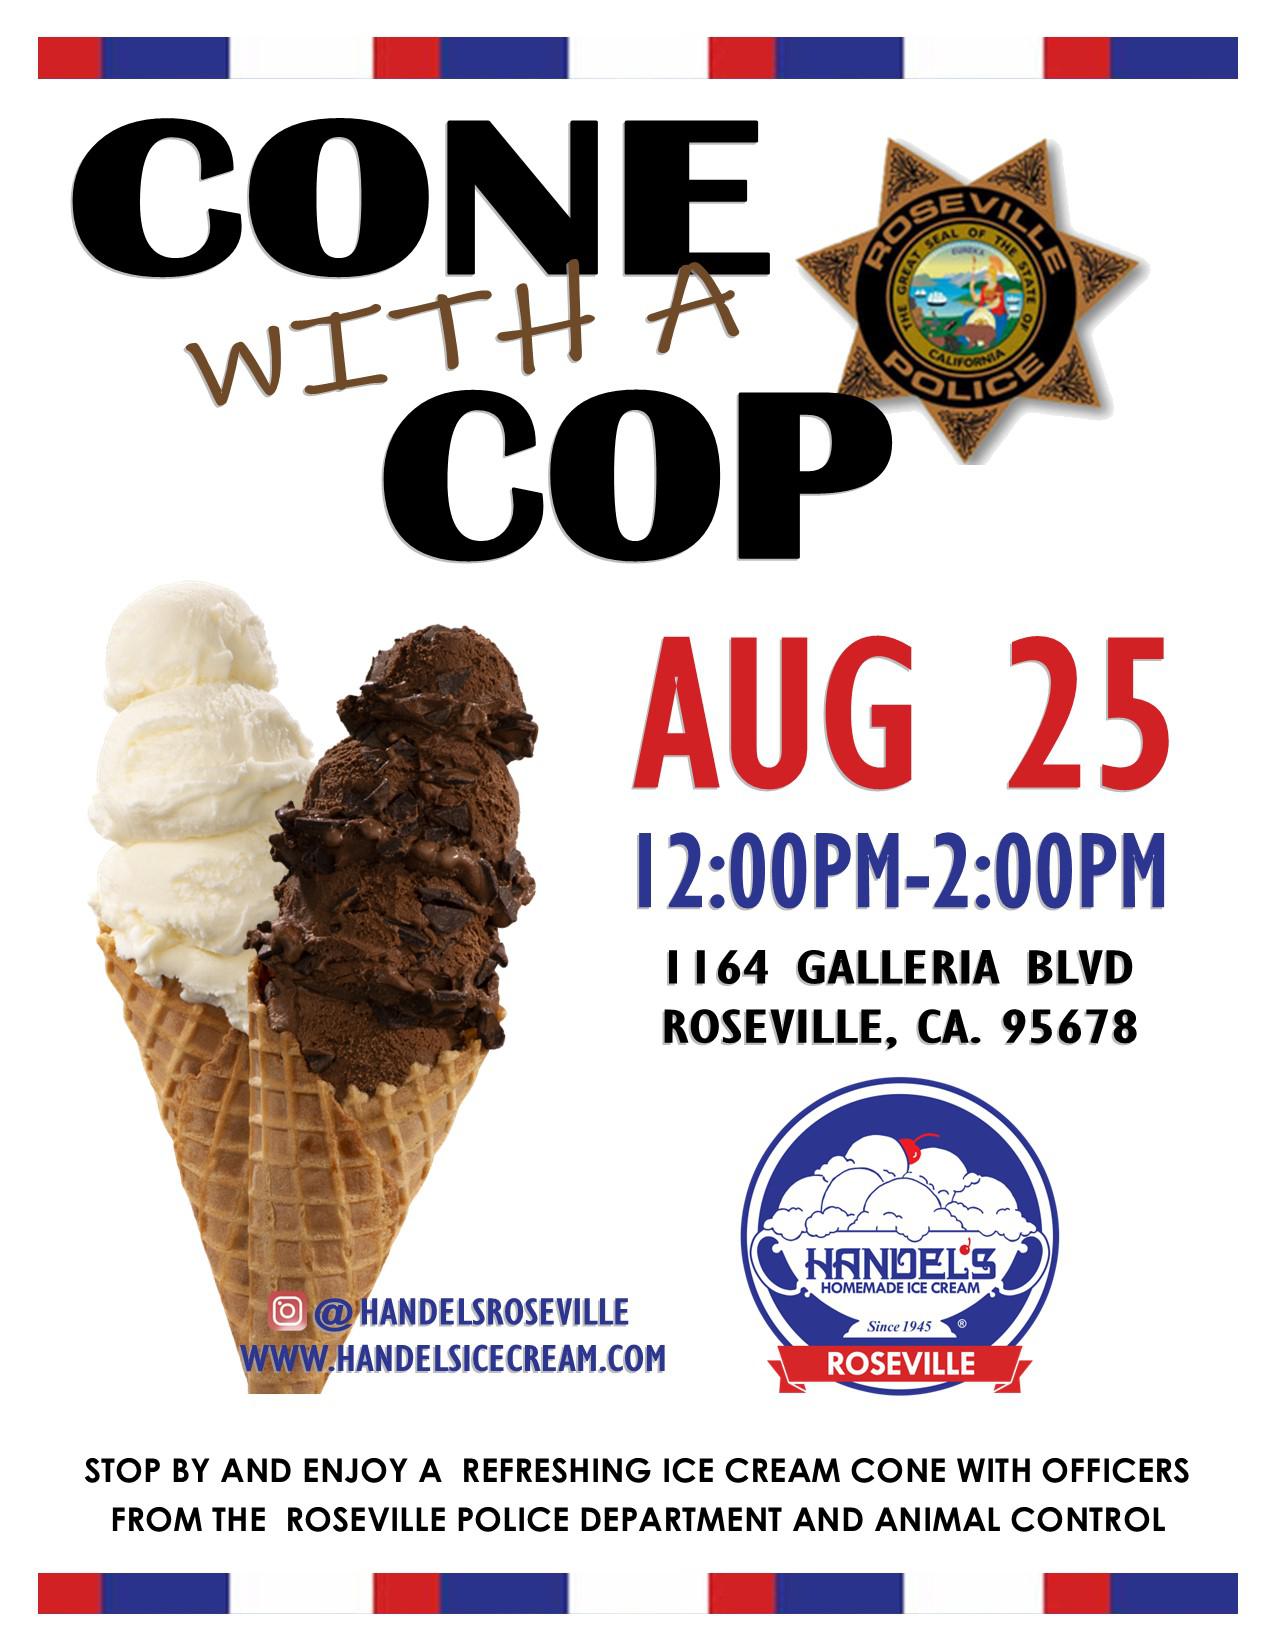 More information about "Cone with a Cop - August 25th"